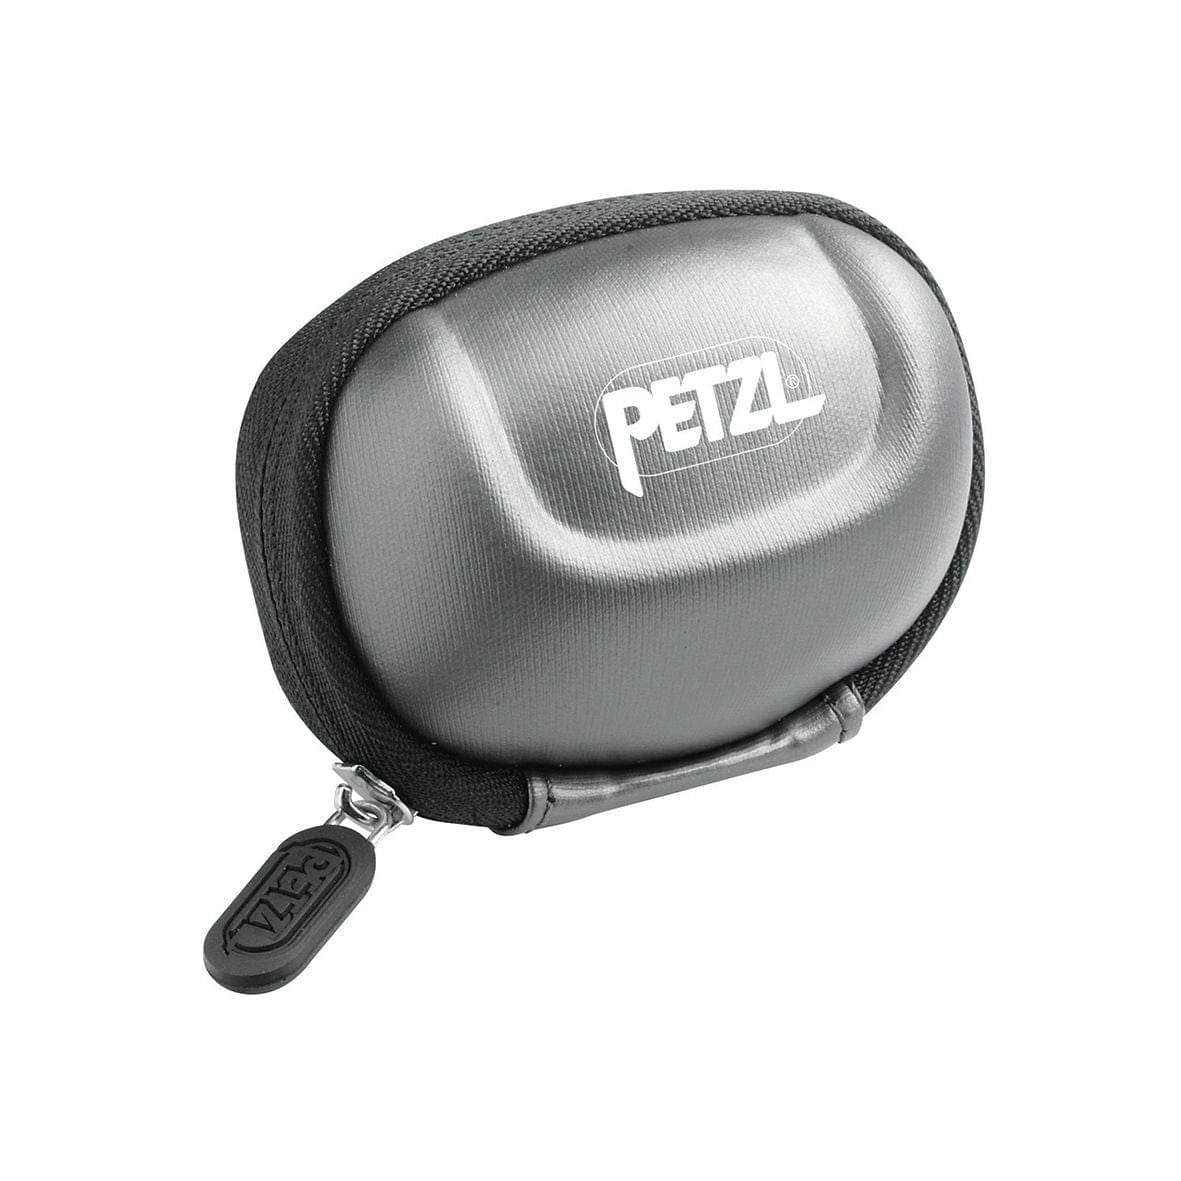 PETZL SHELL S Carry Pouch for Compact Headlamps - ExtremeMeters.com